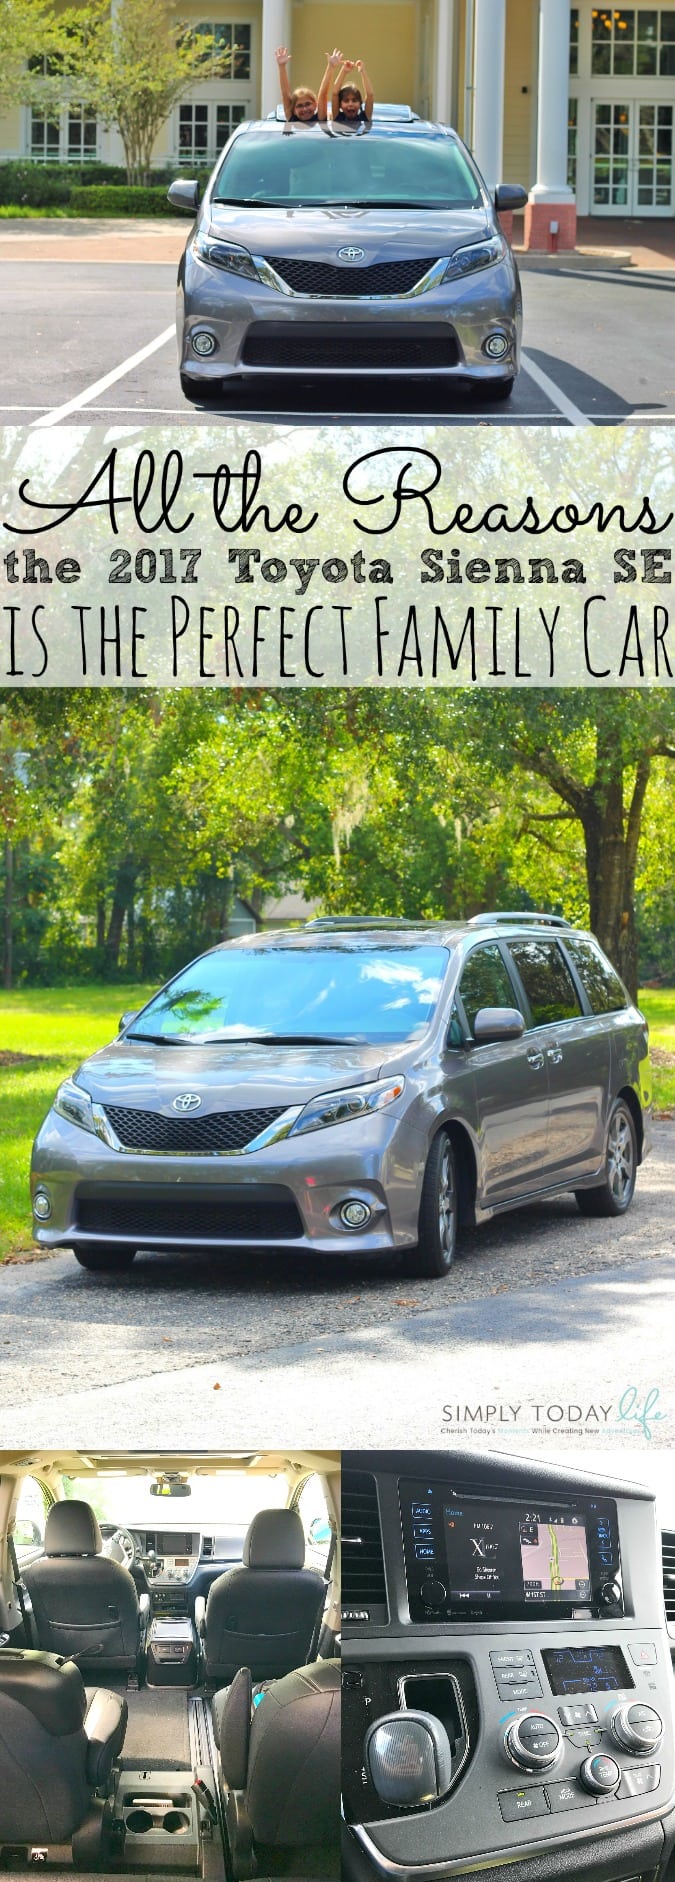 Reasons The Toyota Sienna SE Is The Perfect Family Car - simplytodaylife.com